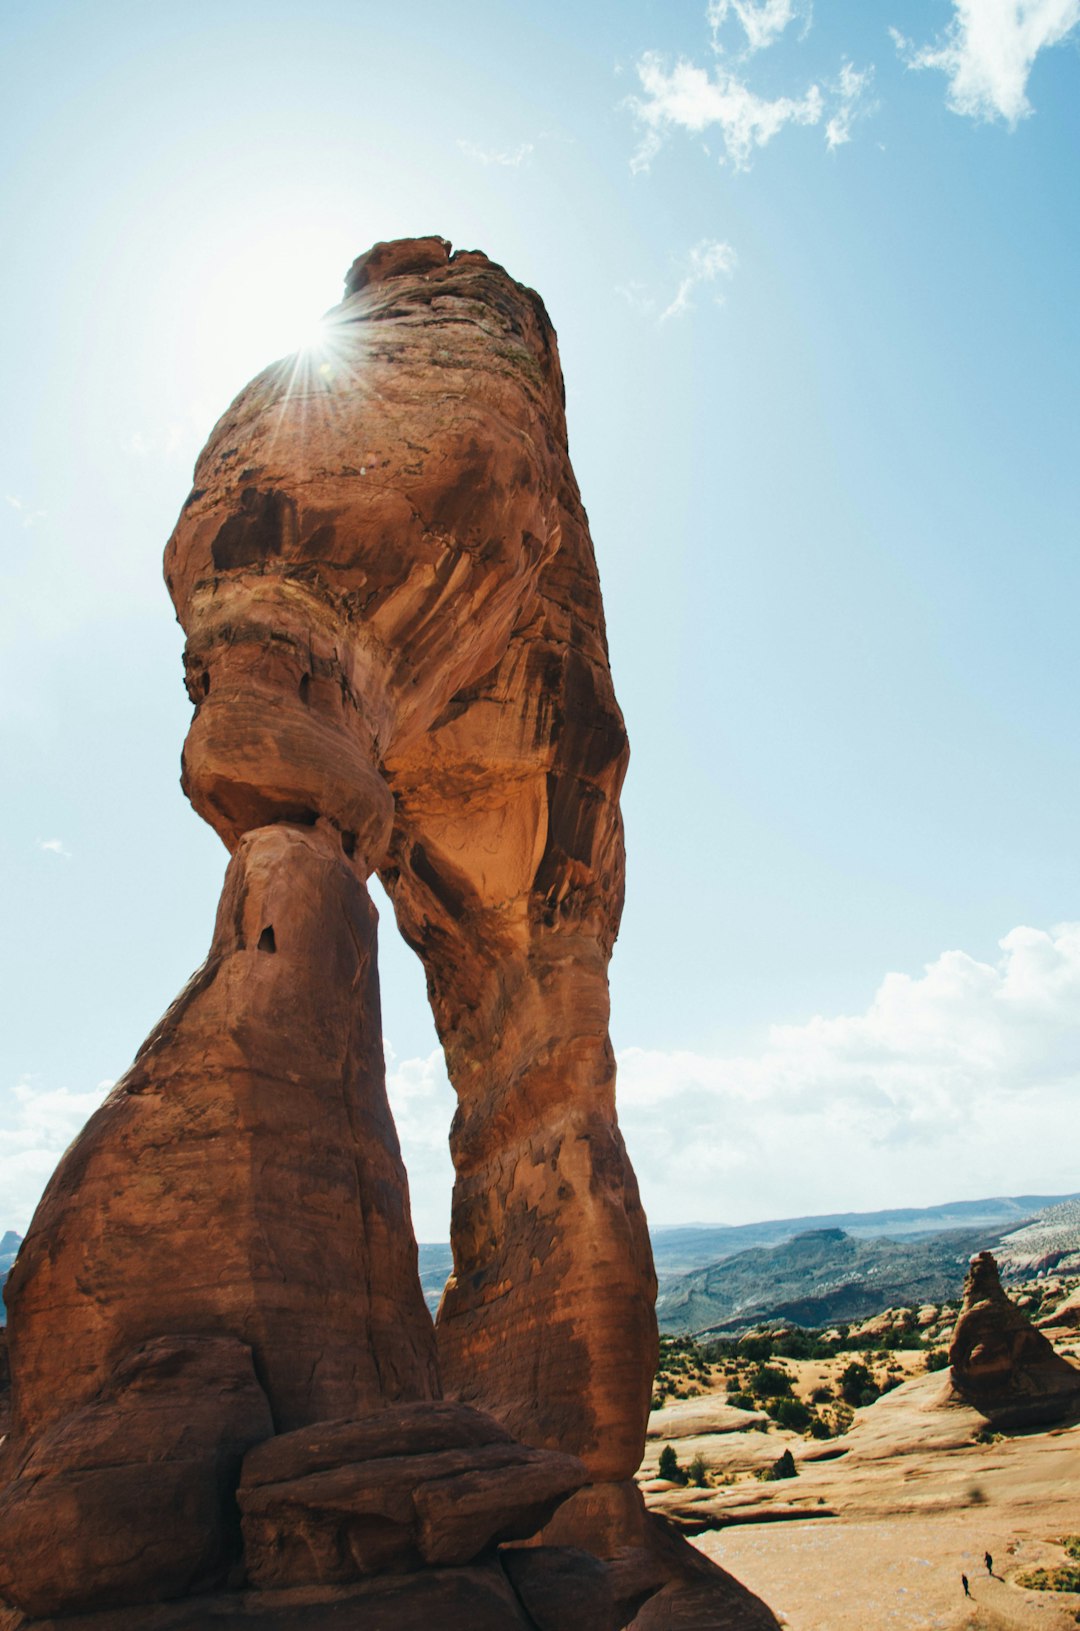 Travel Tips and Stories of Arches National Park in United States